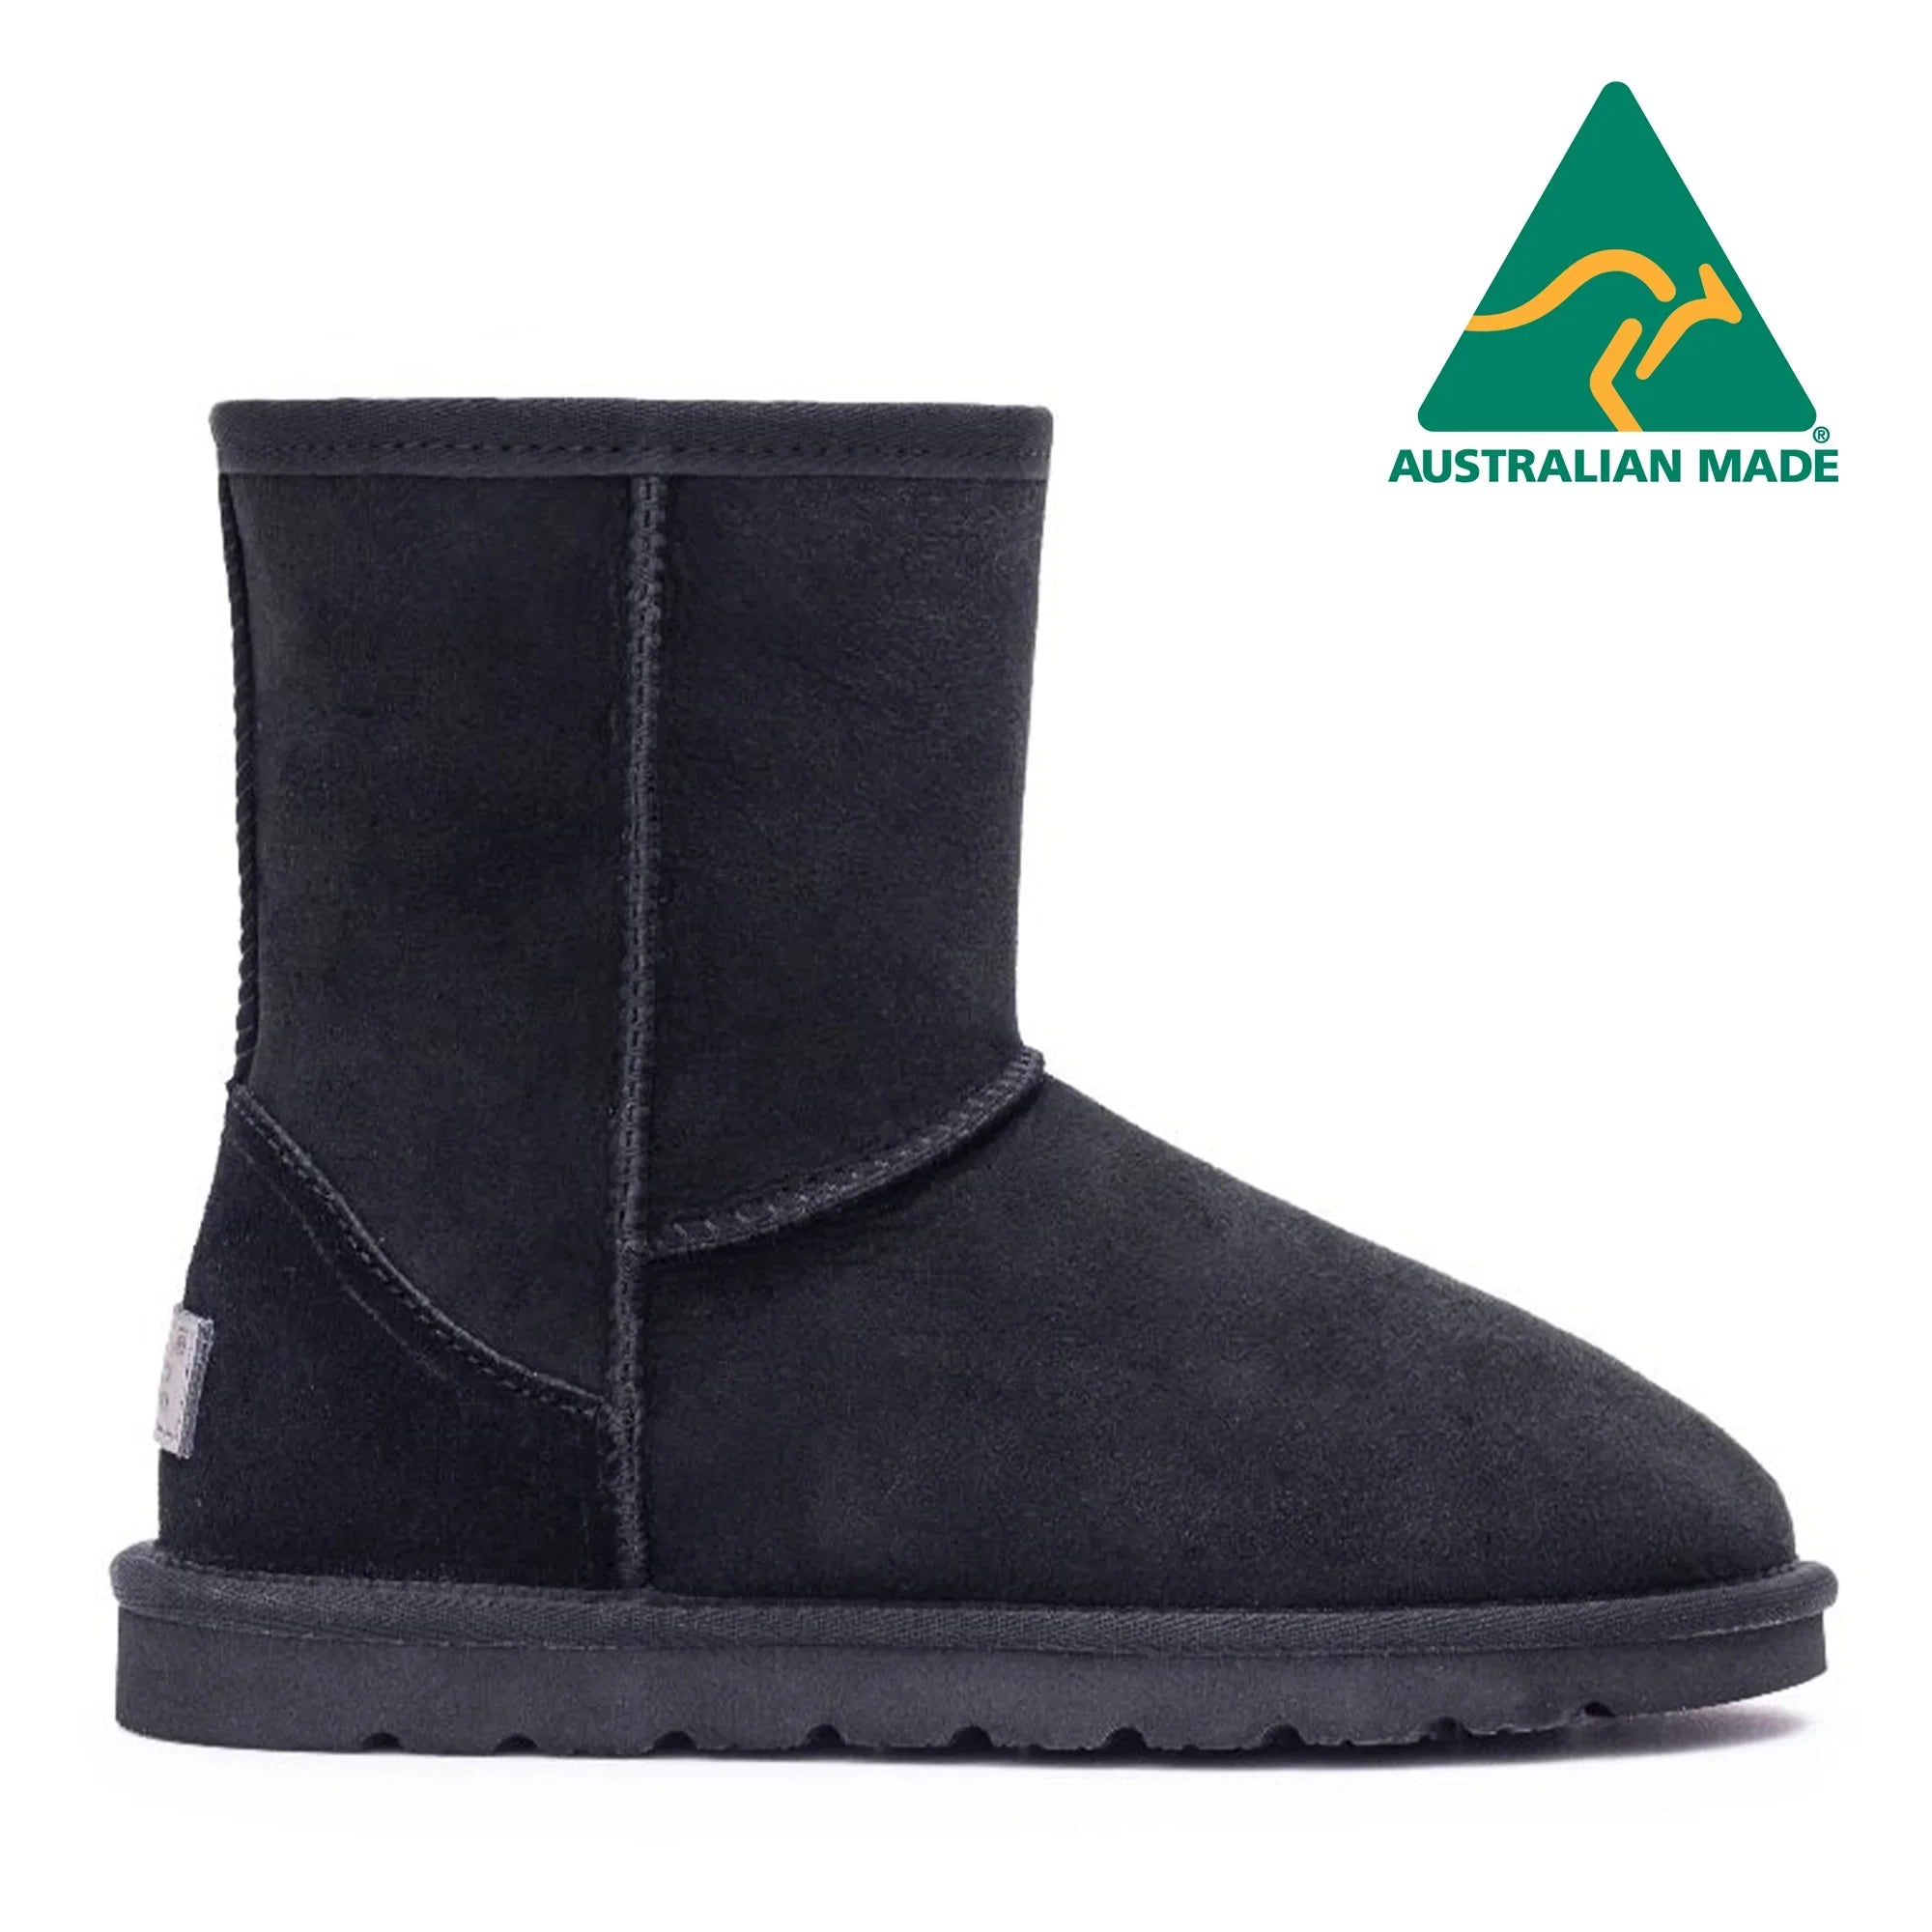 Classic Short UGG Boots - Made in Australia